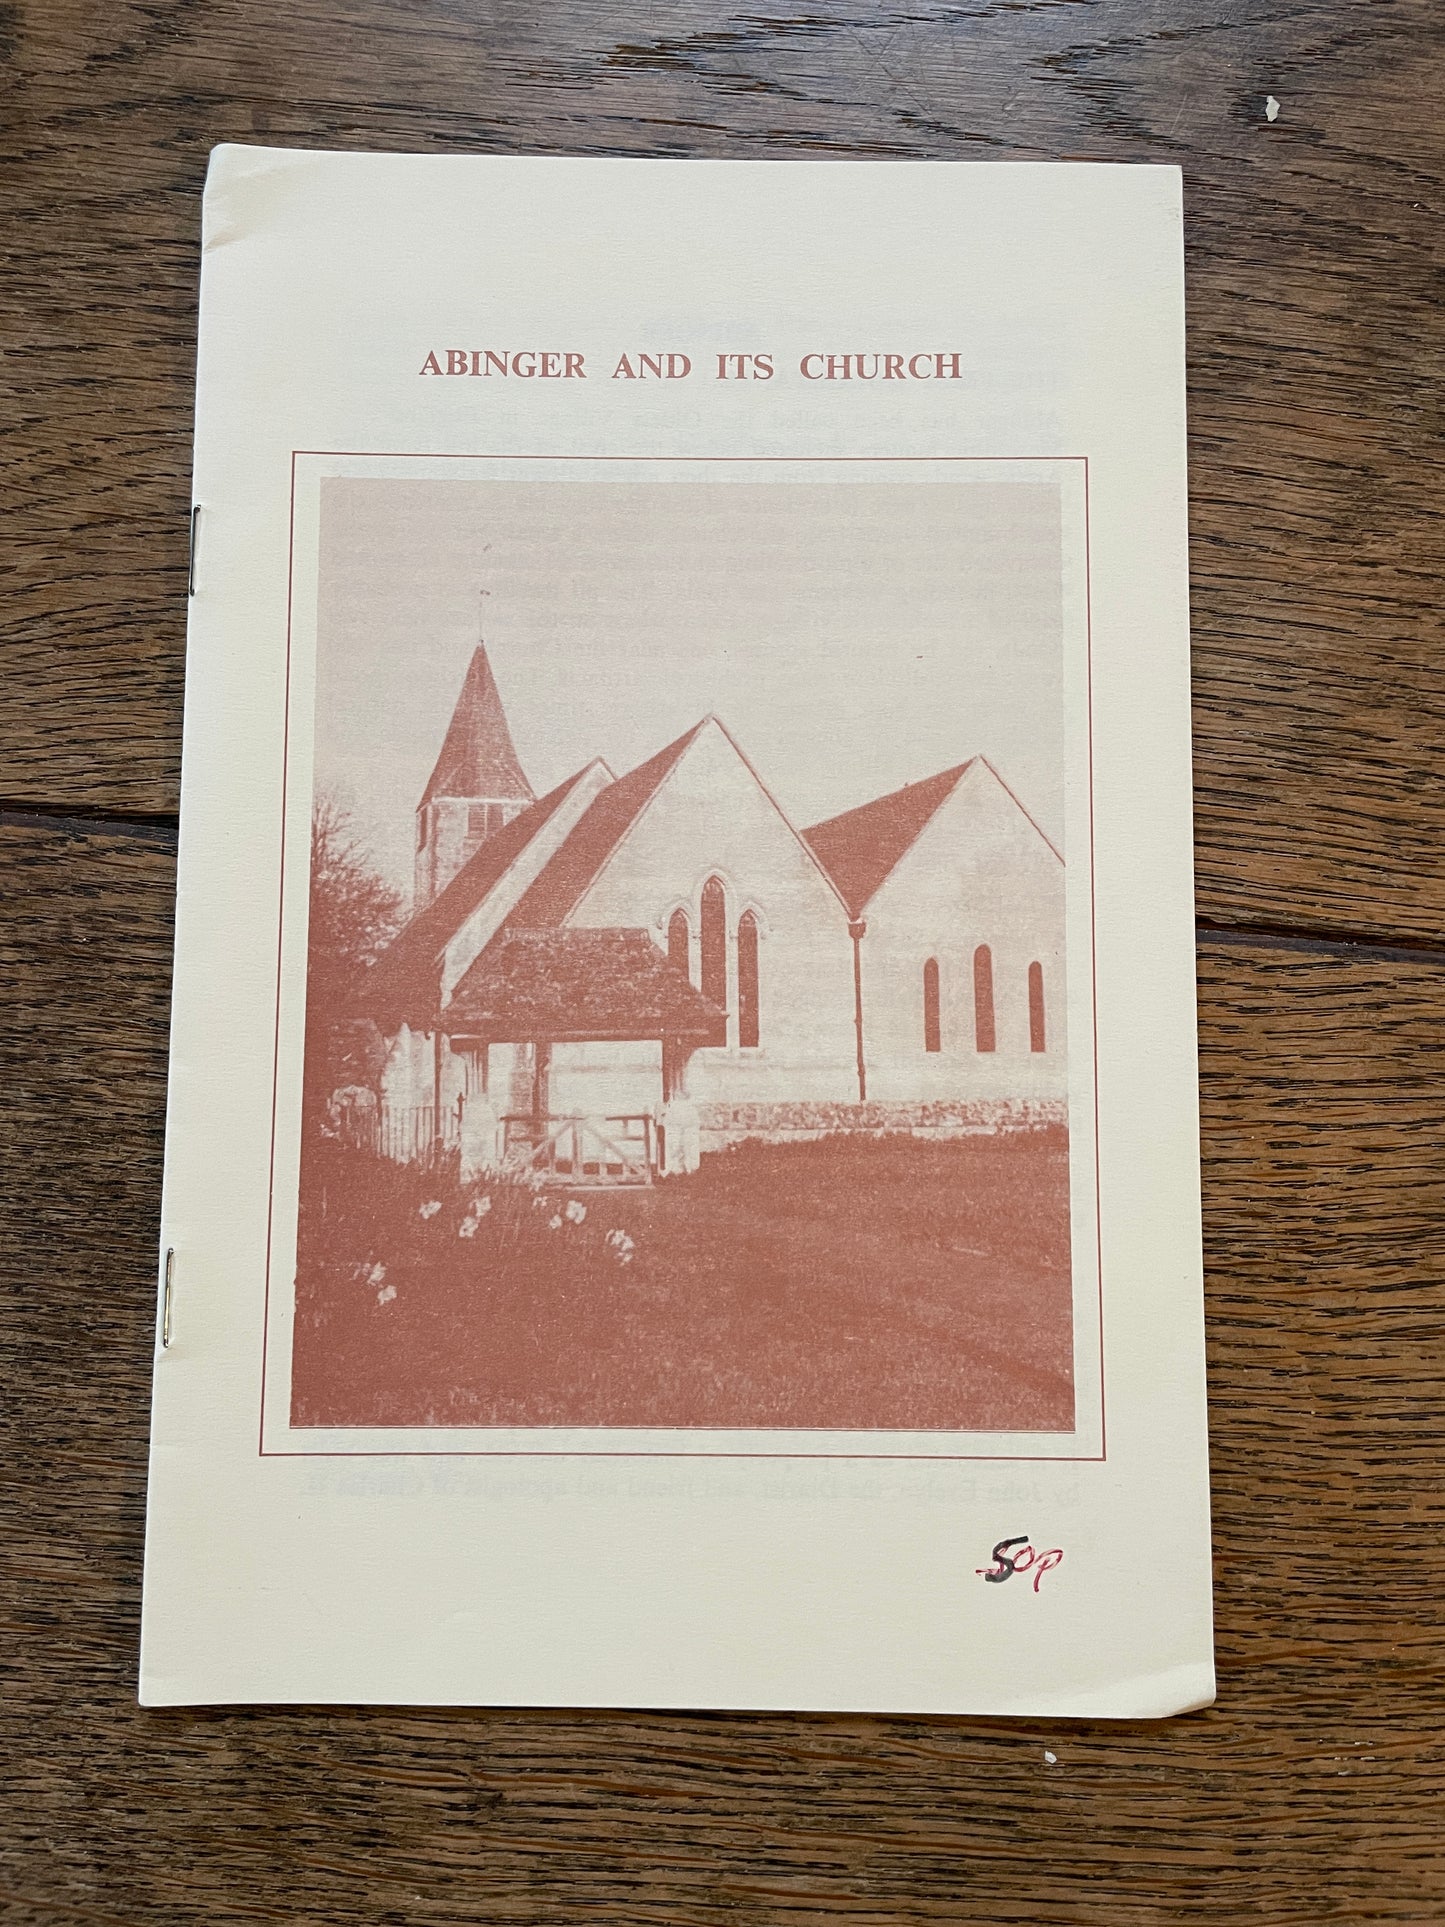 Abinger and its Church - 1990 Booklet by R. J. du Bois